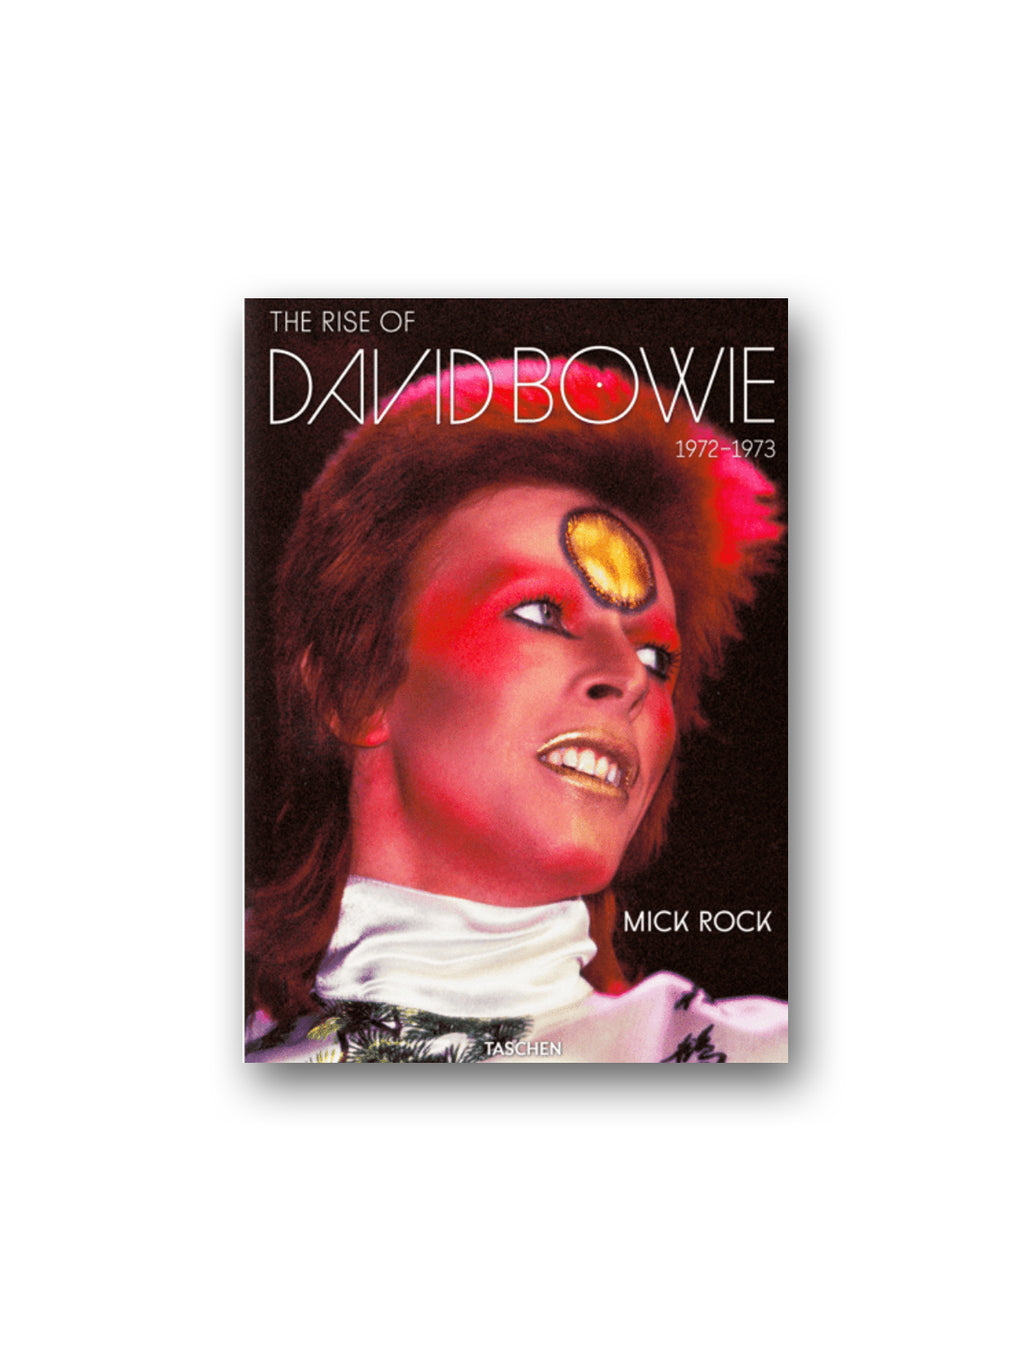 The Rise of David Bowie. 1972-1973